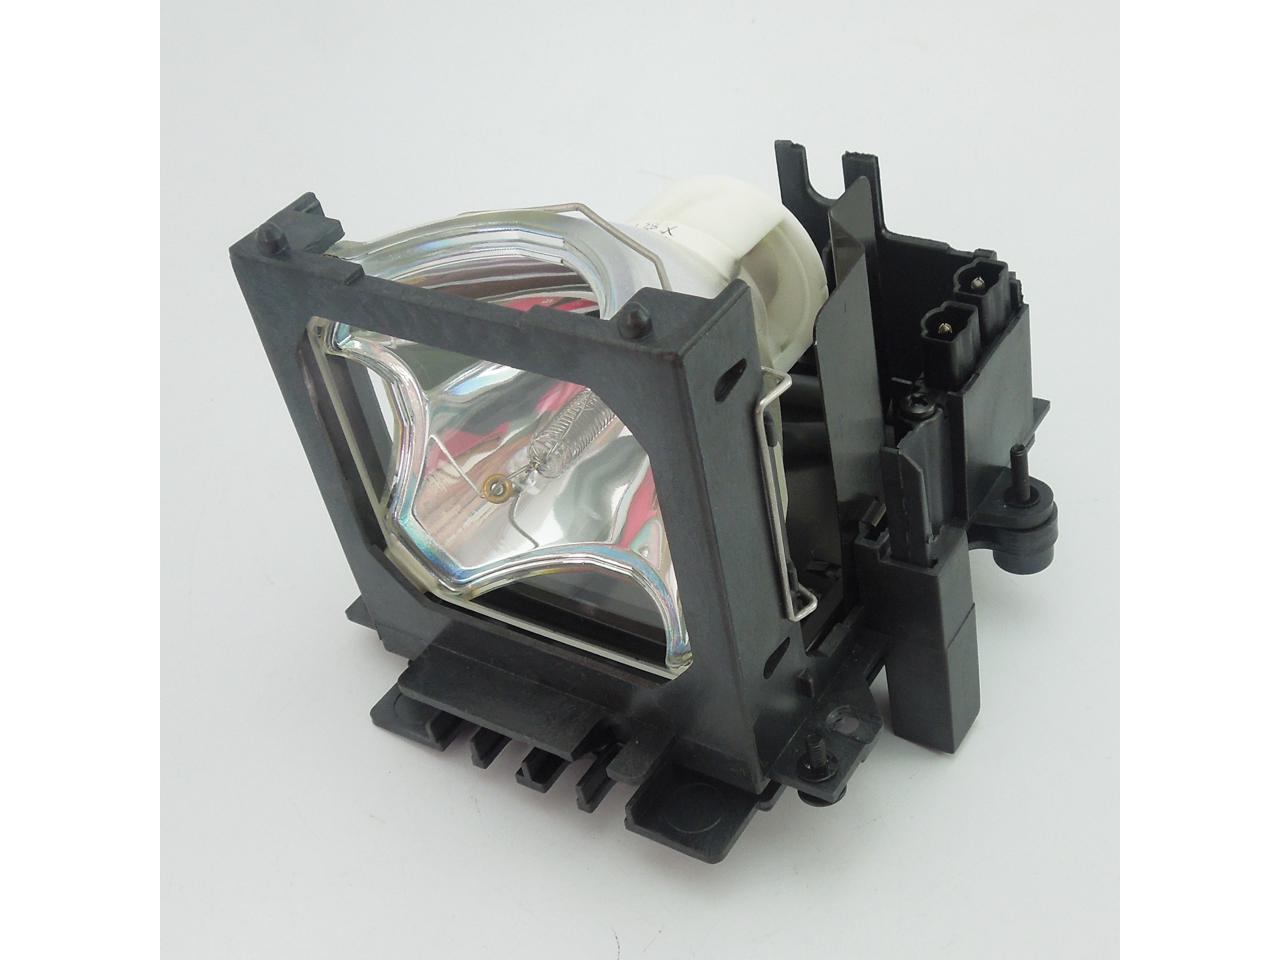 CP-X1200W CP-X1200WA CTLAMP DT00591 Professional Replacement Projector Lamp with Housing for HITACHI CP-X1200